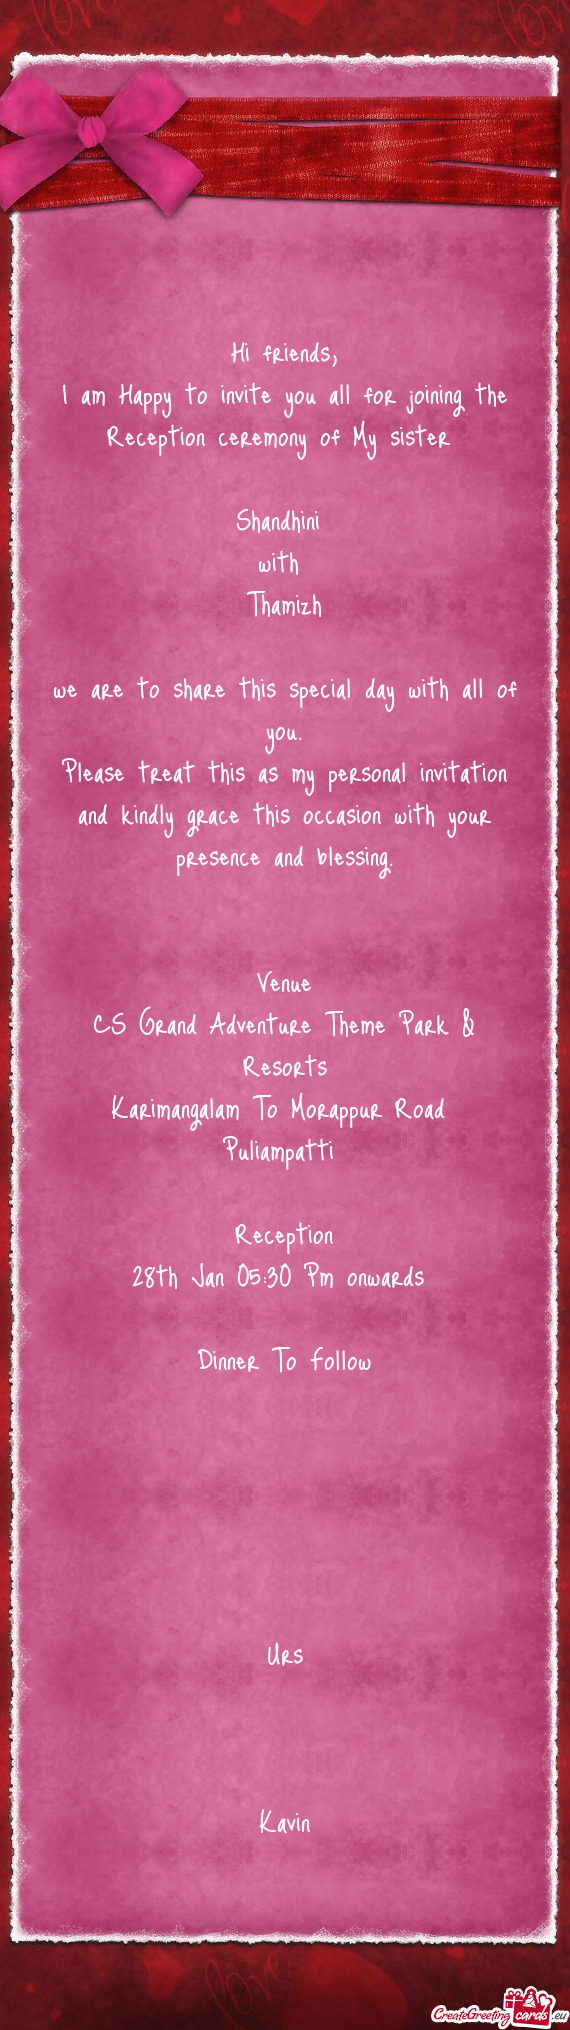 Thamizh
 
 we are to share this special day with all of you